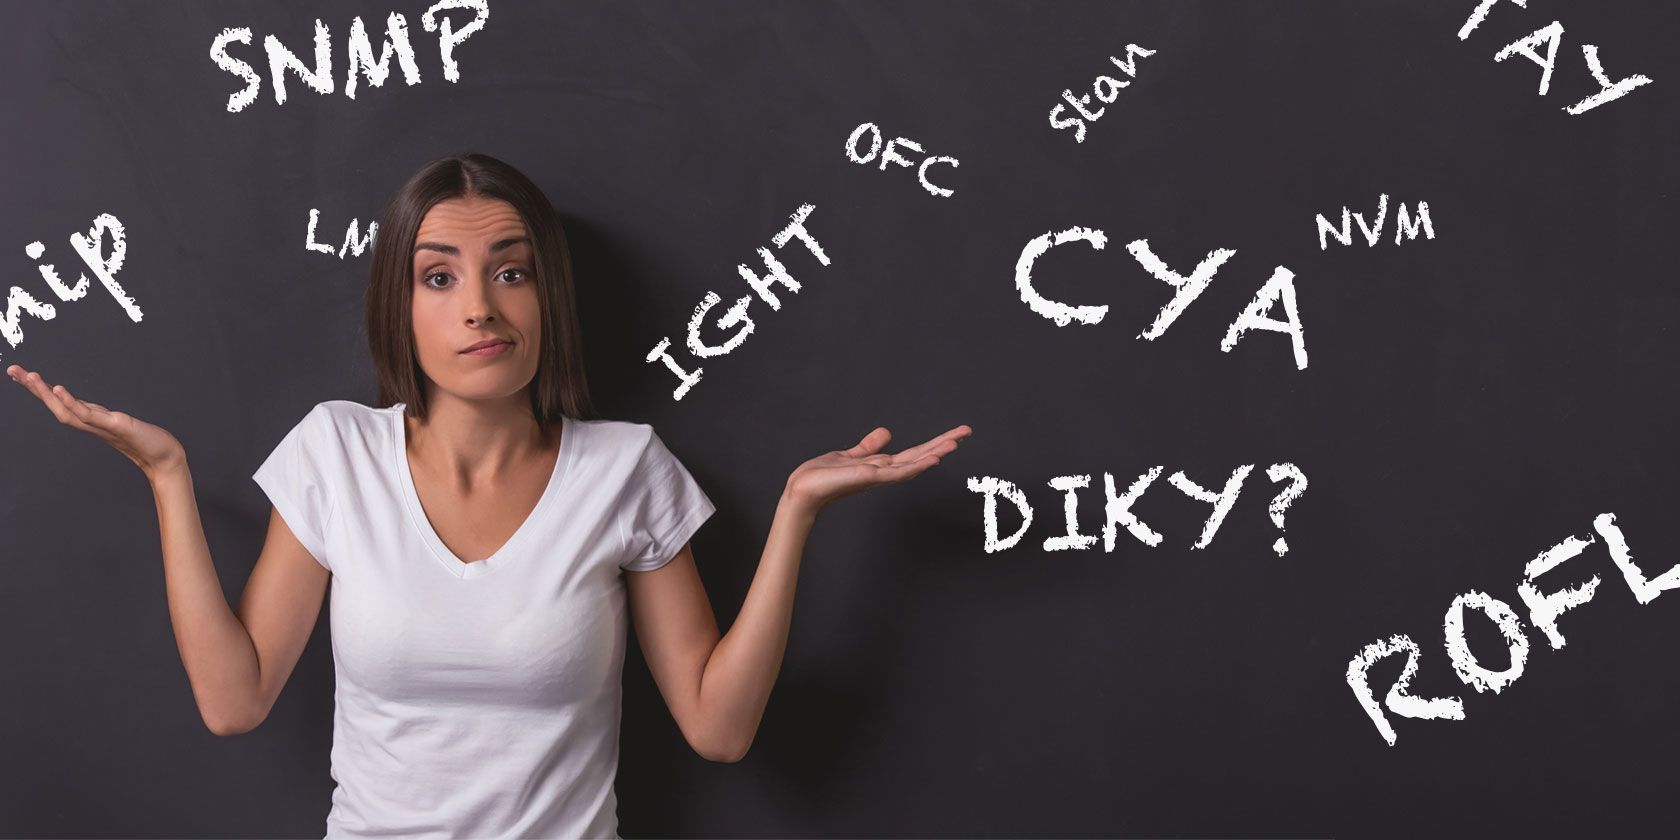 30 More Internet Slang Words And Acronyms You Need To Know